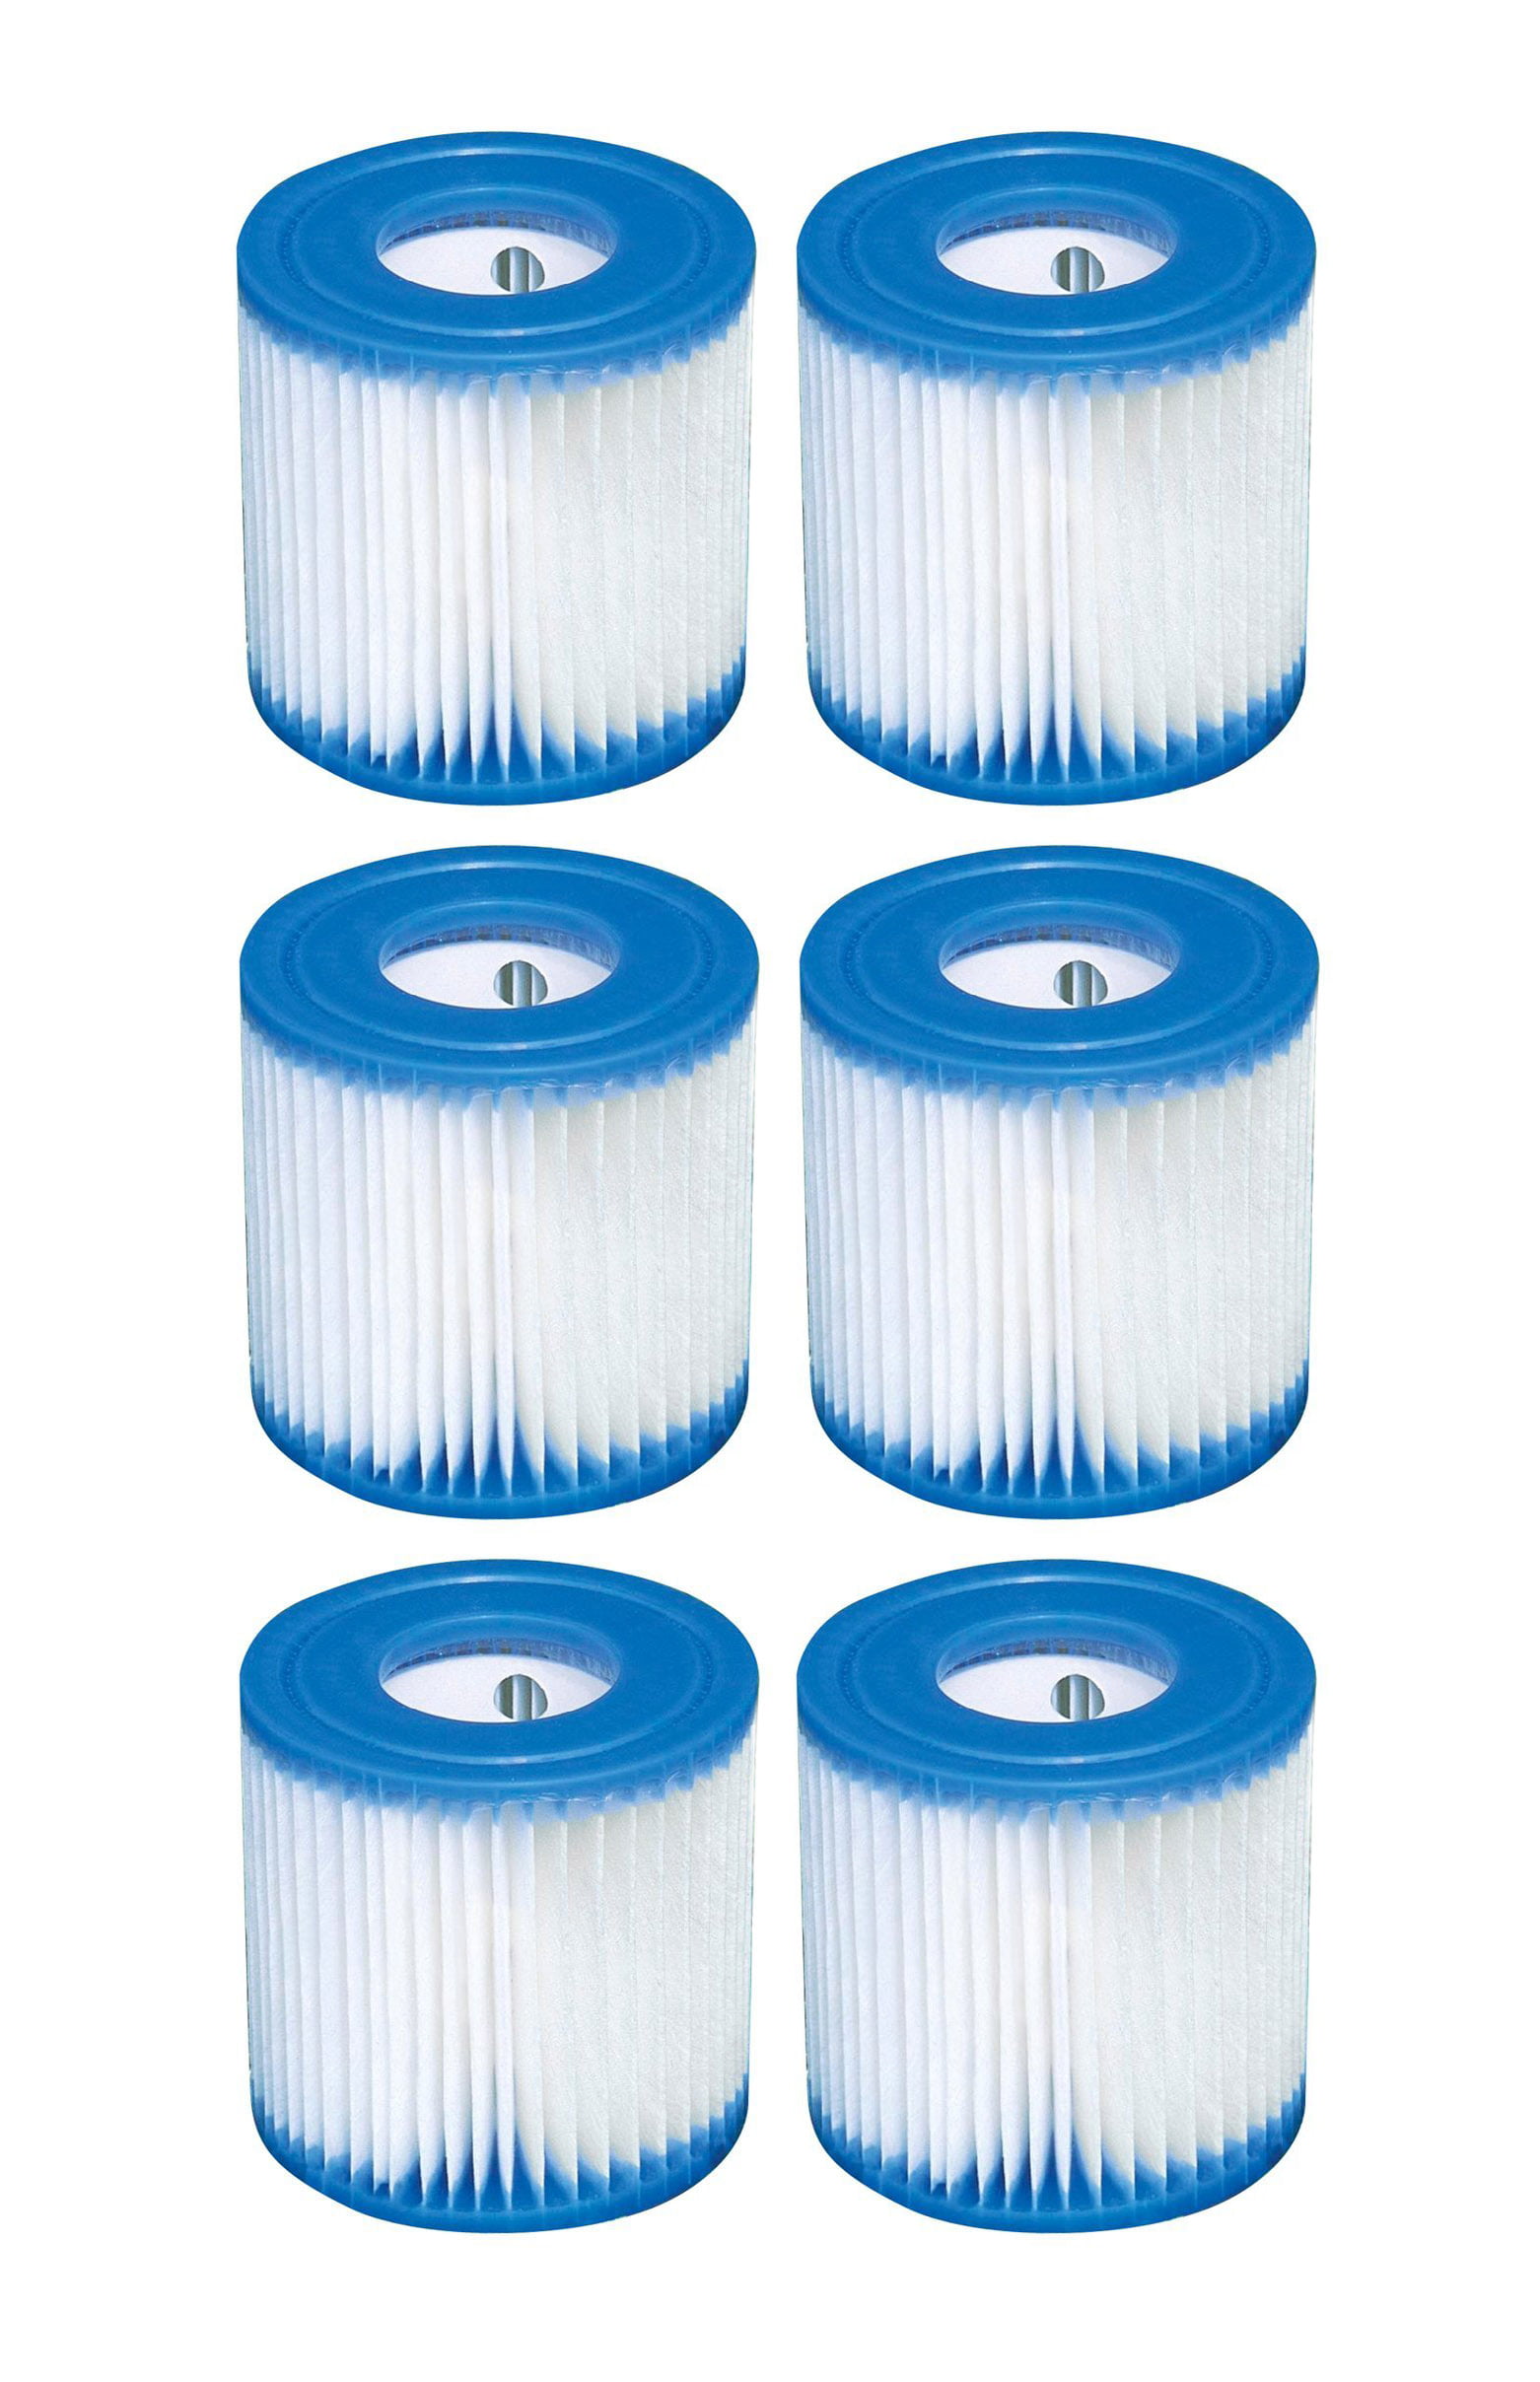 12-Pack Set Spa Hot Tub Filter Cartridge Pool Type S1 Replacement Easy To Clean 